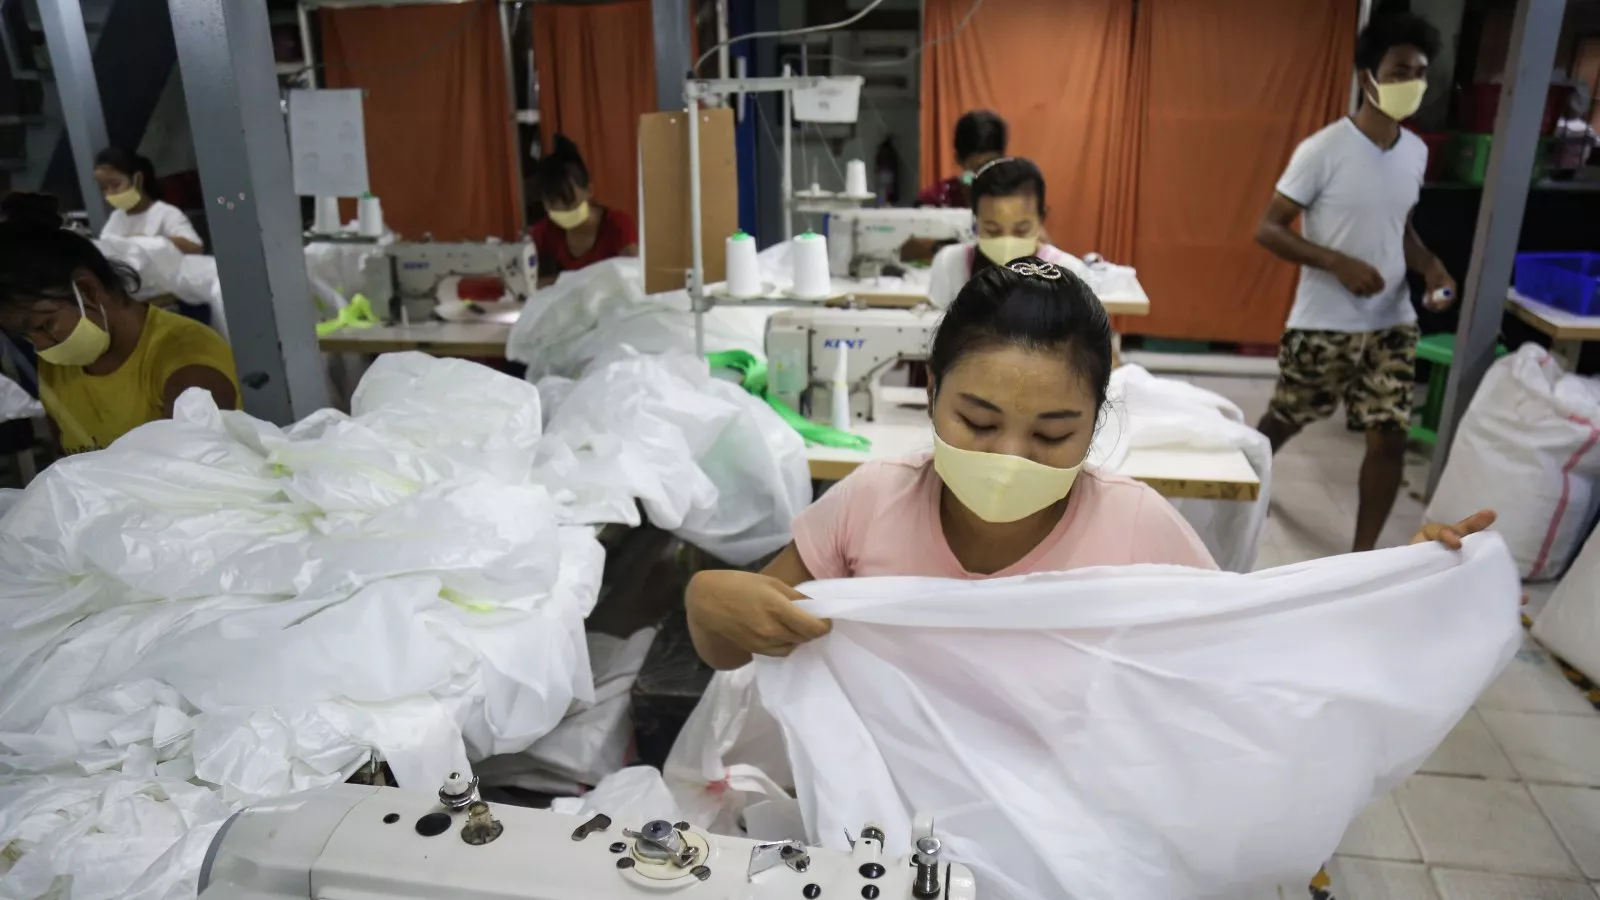 Fashion Brands Are Profiting From the Erosion of Workers' Rights in Myanmar | Opinion